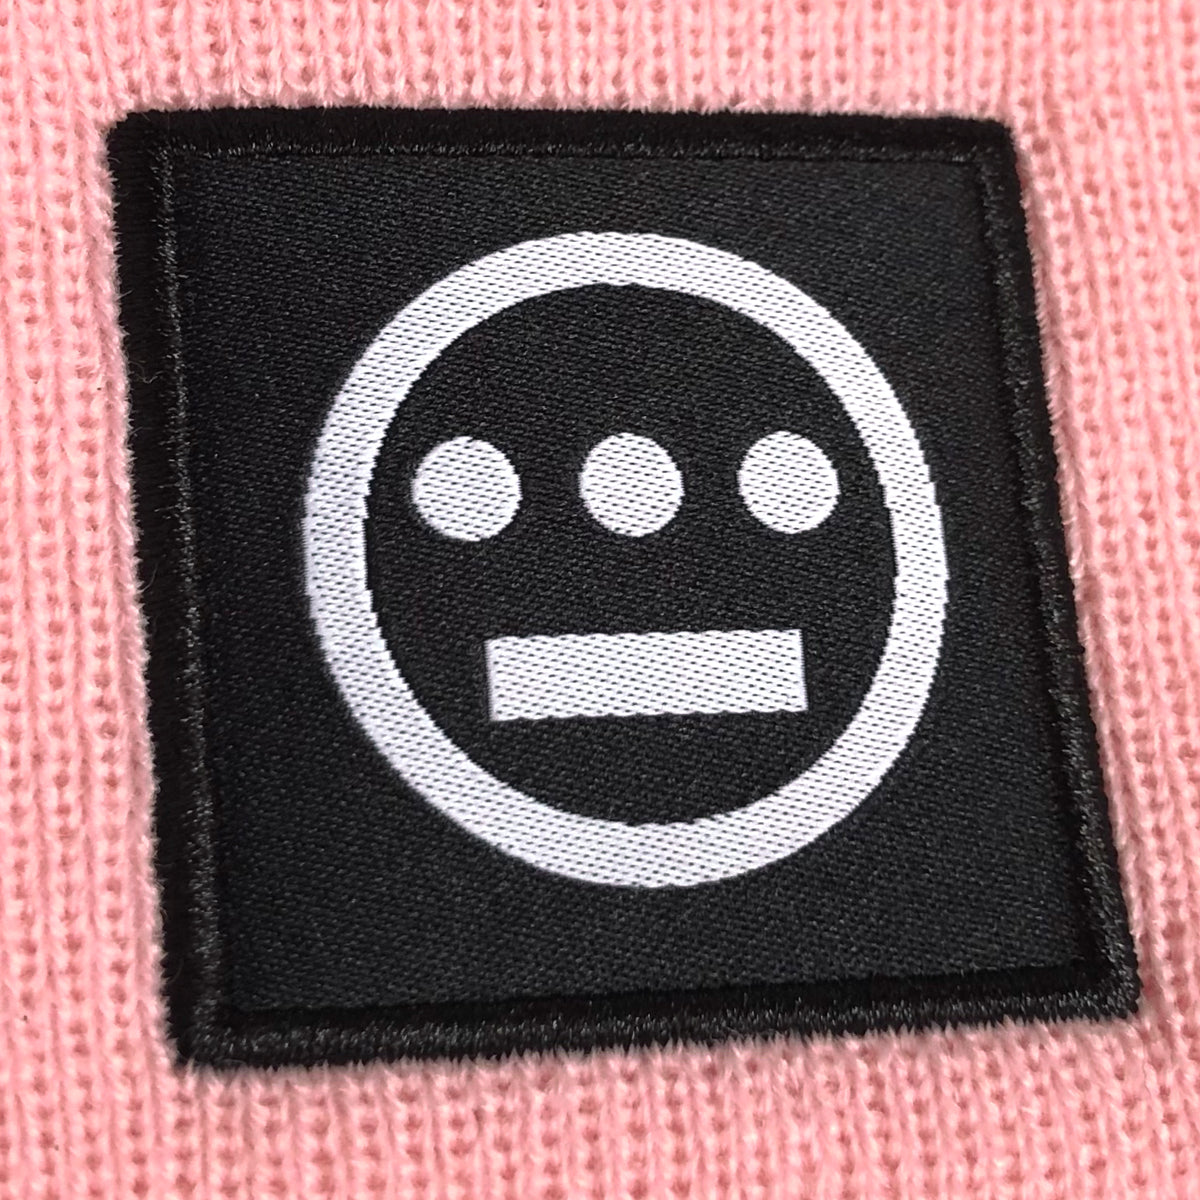 Close up of black and white hiero hip-hop logo patch on the cuff of a pink beanie.